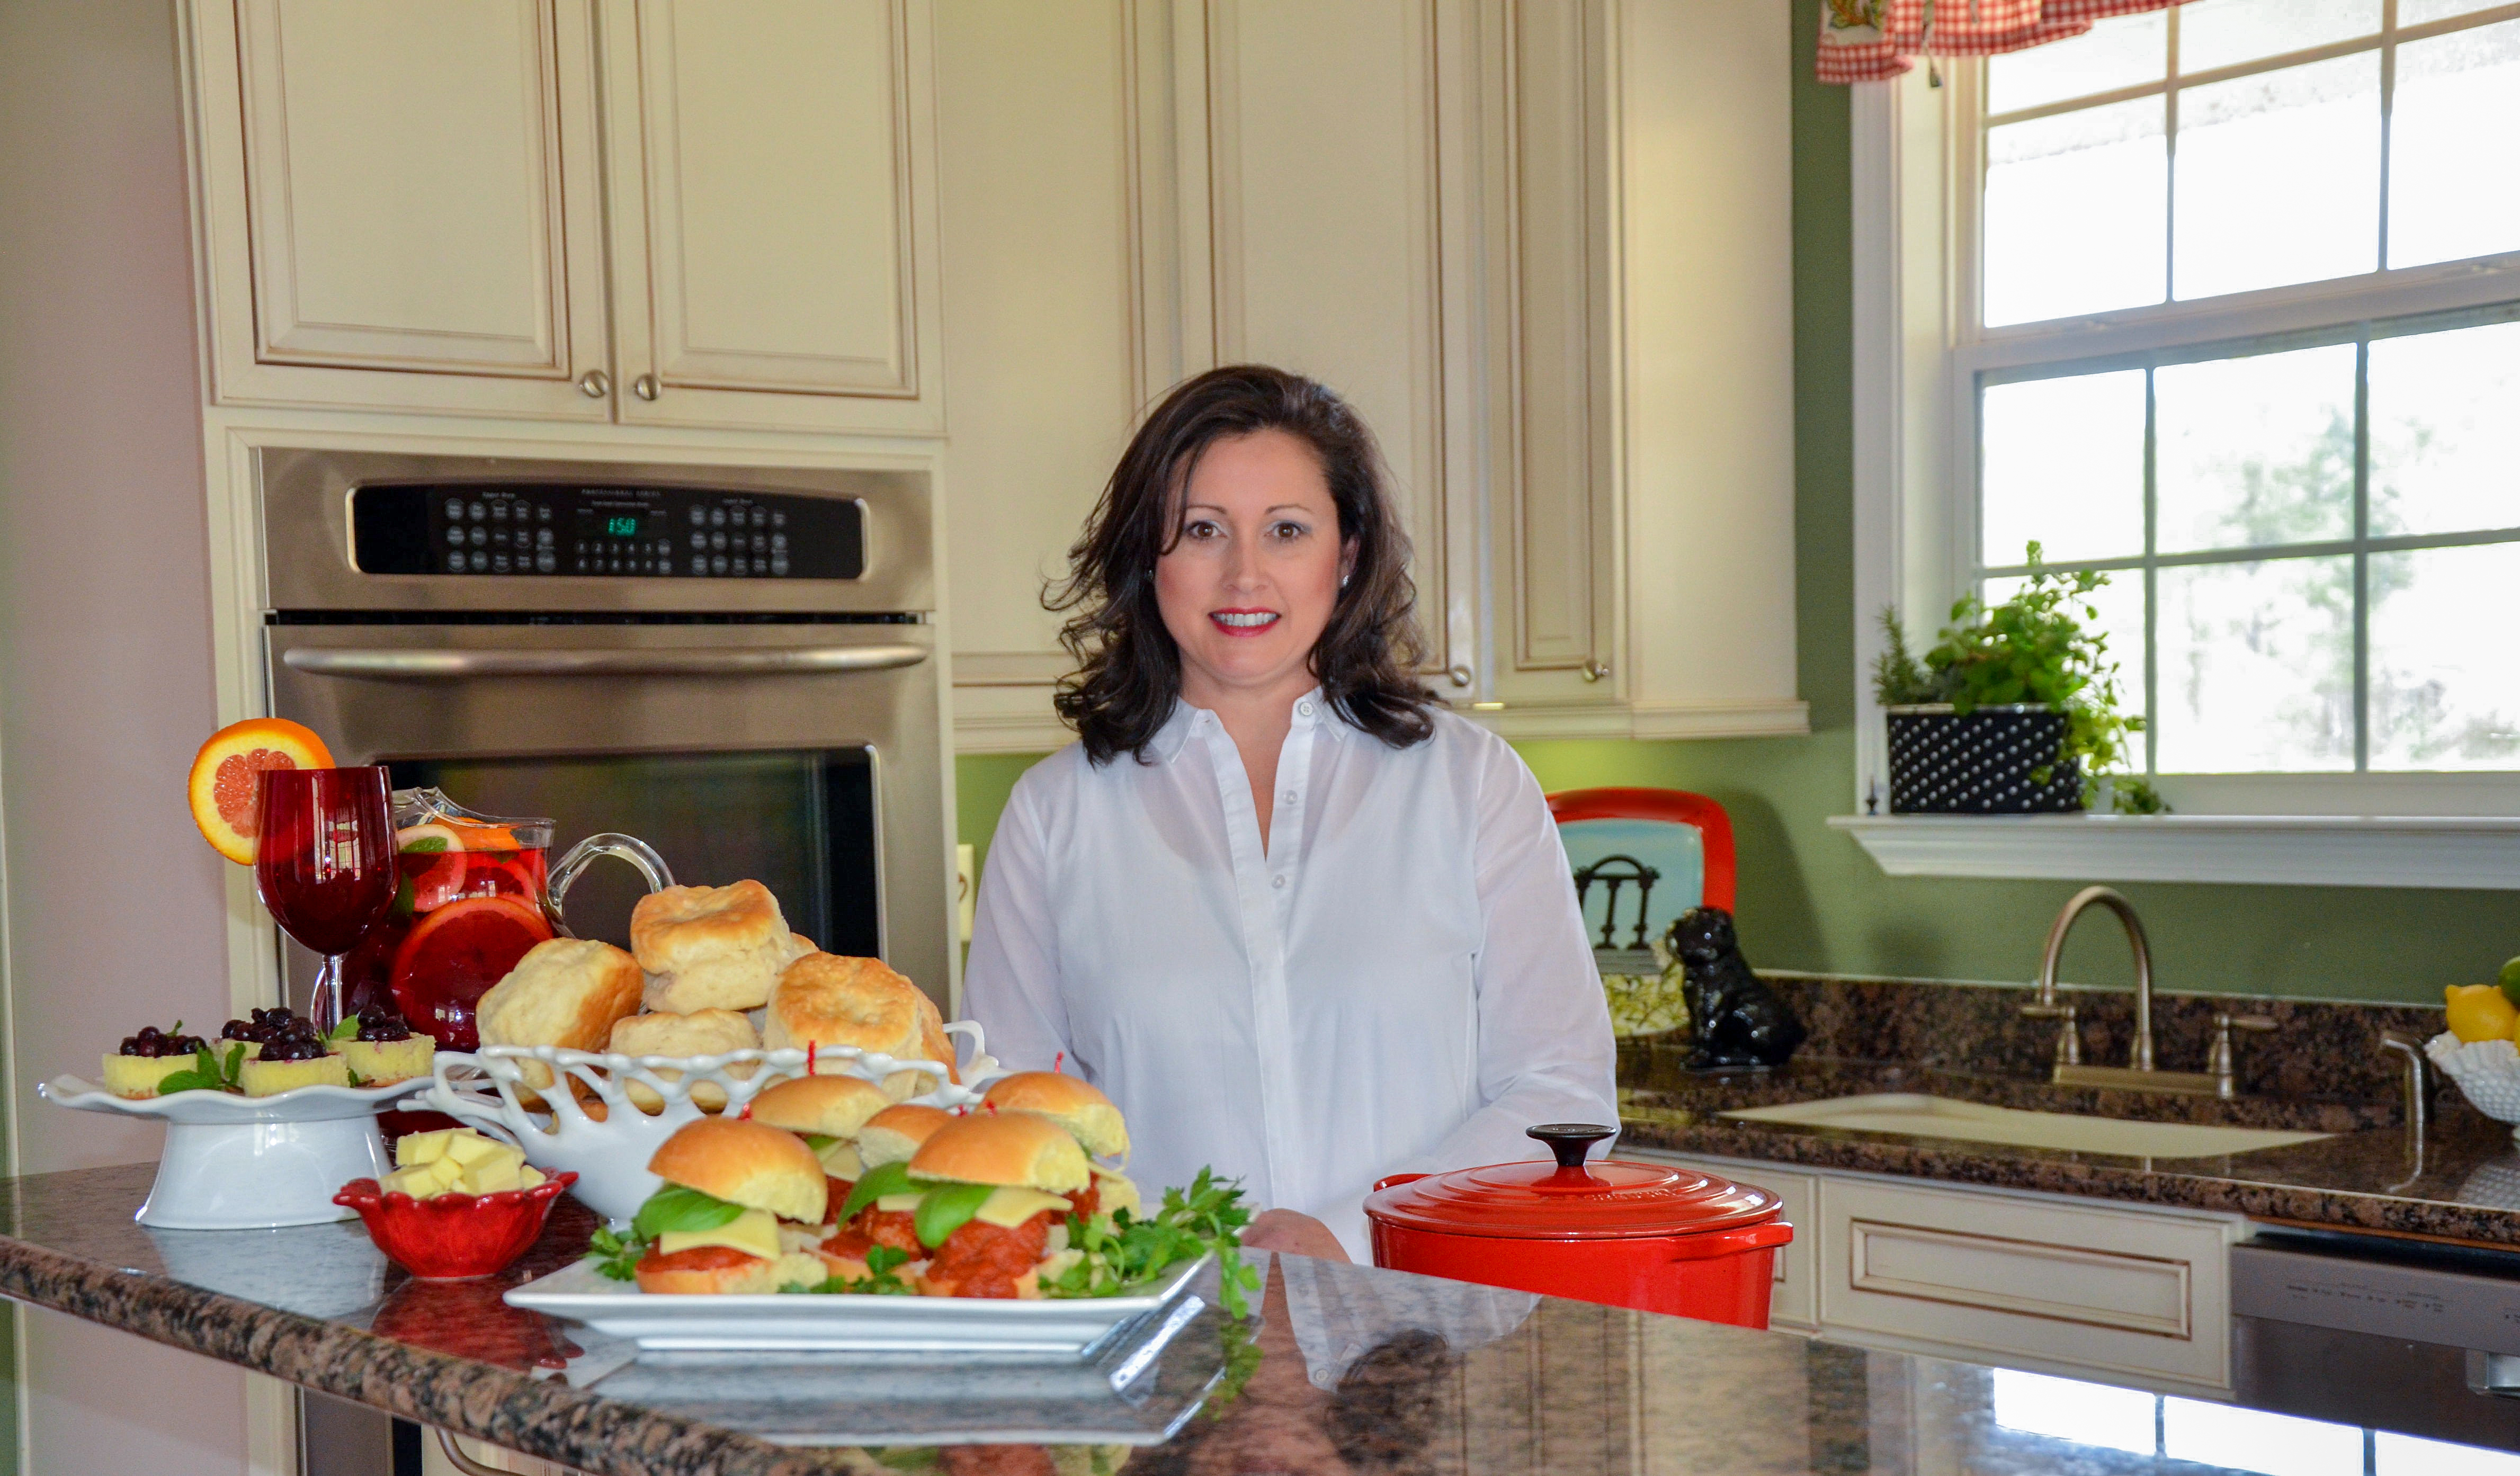 The Trussville Tribune teams up with best-selling cookbook author Suzanne Johnson for new video series, Southern Bits and Bites